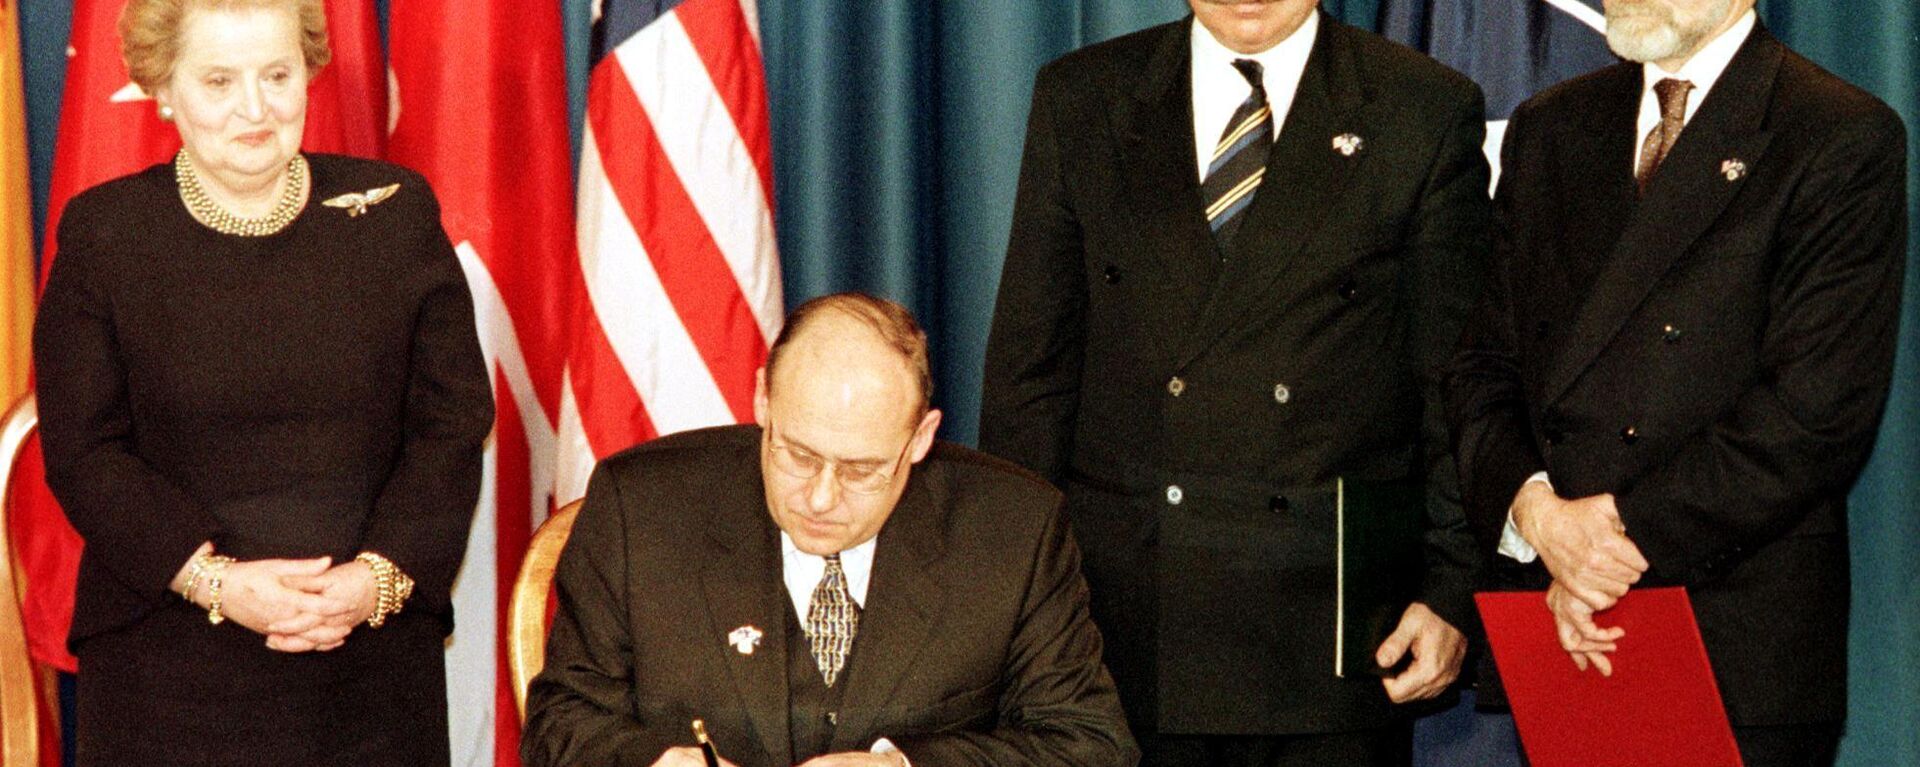 The Minister of Foreign Affairs of the Czech Republic Jan Kavan (seated) signs the accession document that enters the Czech Republic into NATO 12 March 1999 at the Harry Truman library in Independence, MO.  Standing are US Secretary of State Madeleine Albright (L), Minister of Foreign Affairs of Hungary Janos Martonyi (C), and Minister of Foreign Affairs of Poland Bronislaw Geremek (R). - Sputnik International, 1920, 12.03.2024